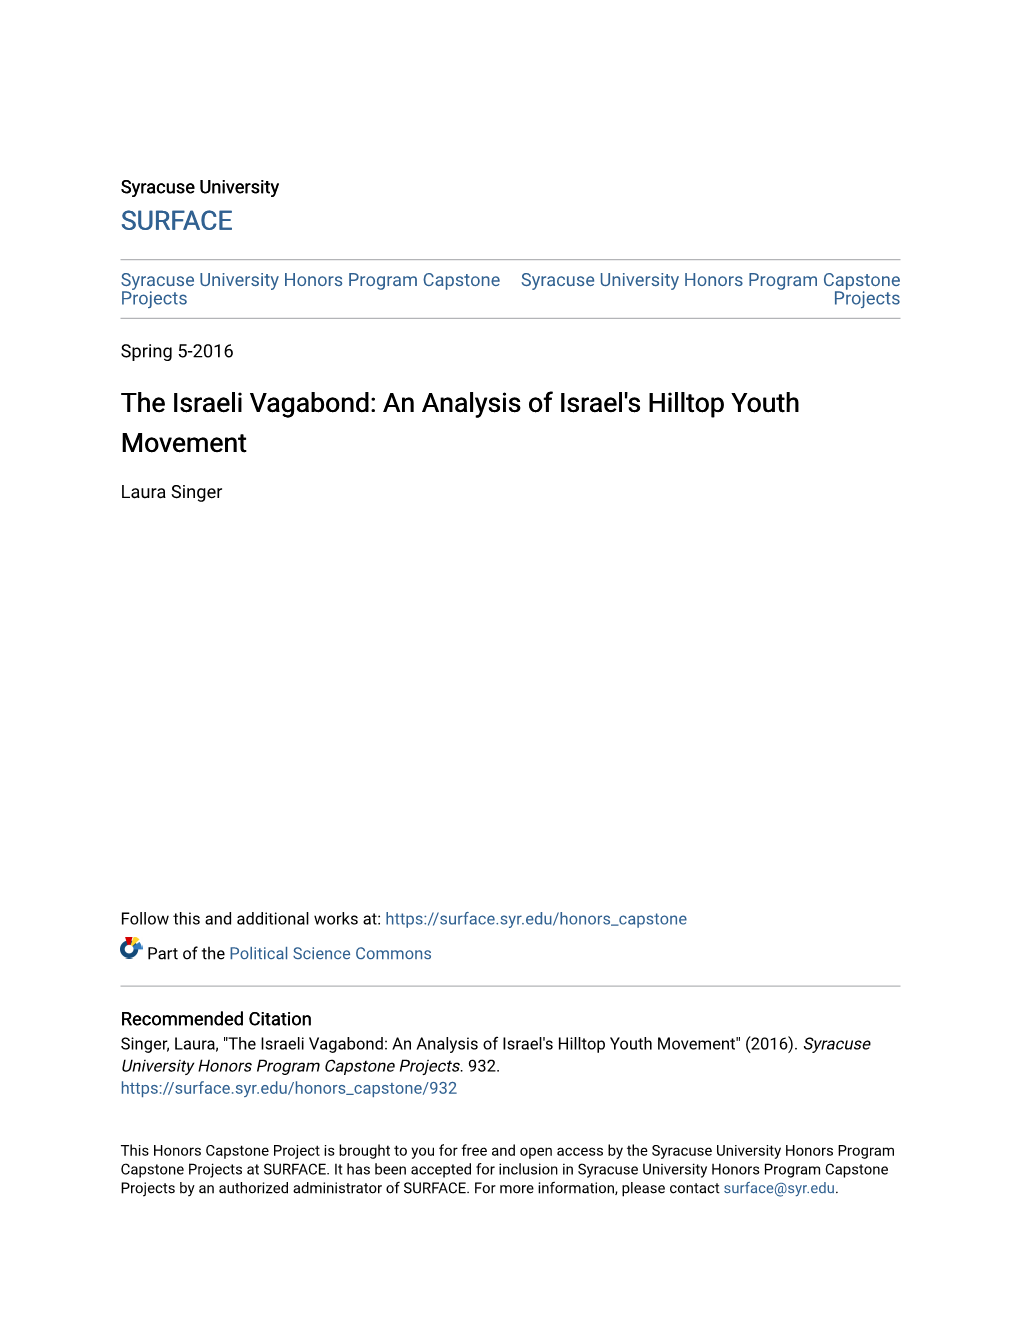 An Analysis of Israel's Hilltop Youth Movement